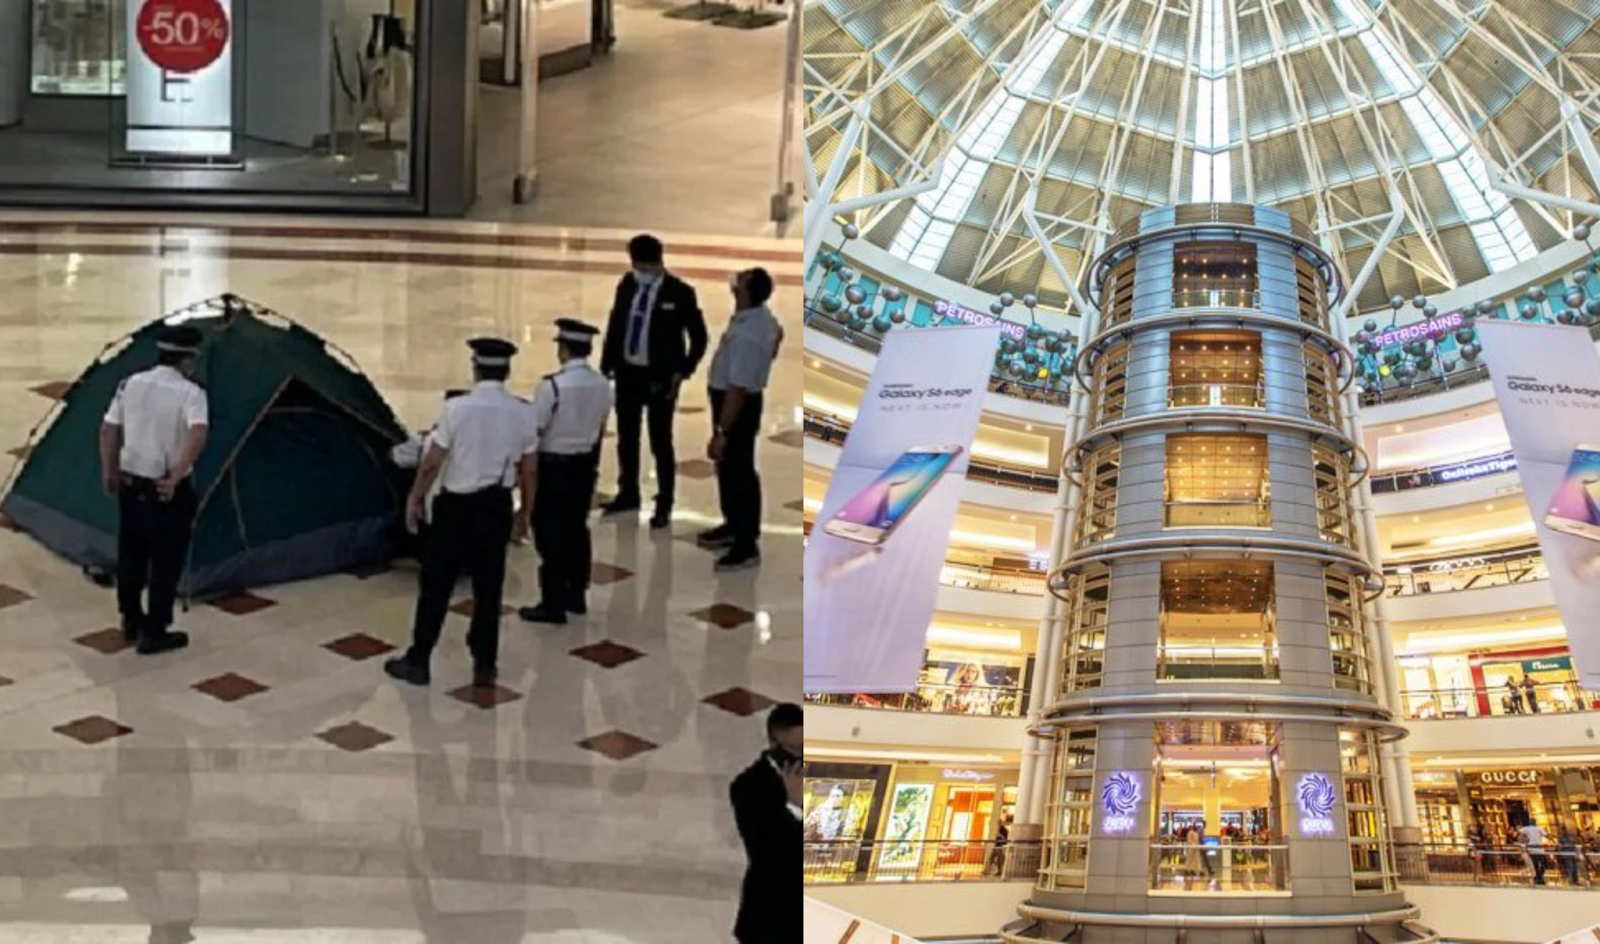 Woman, 23, Reportedly Fell From The Fourth Floor Of Suria KLCC